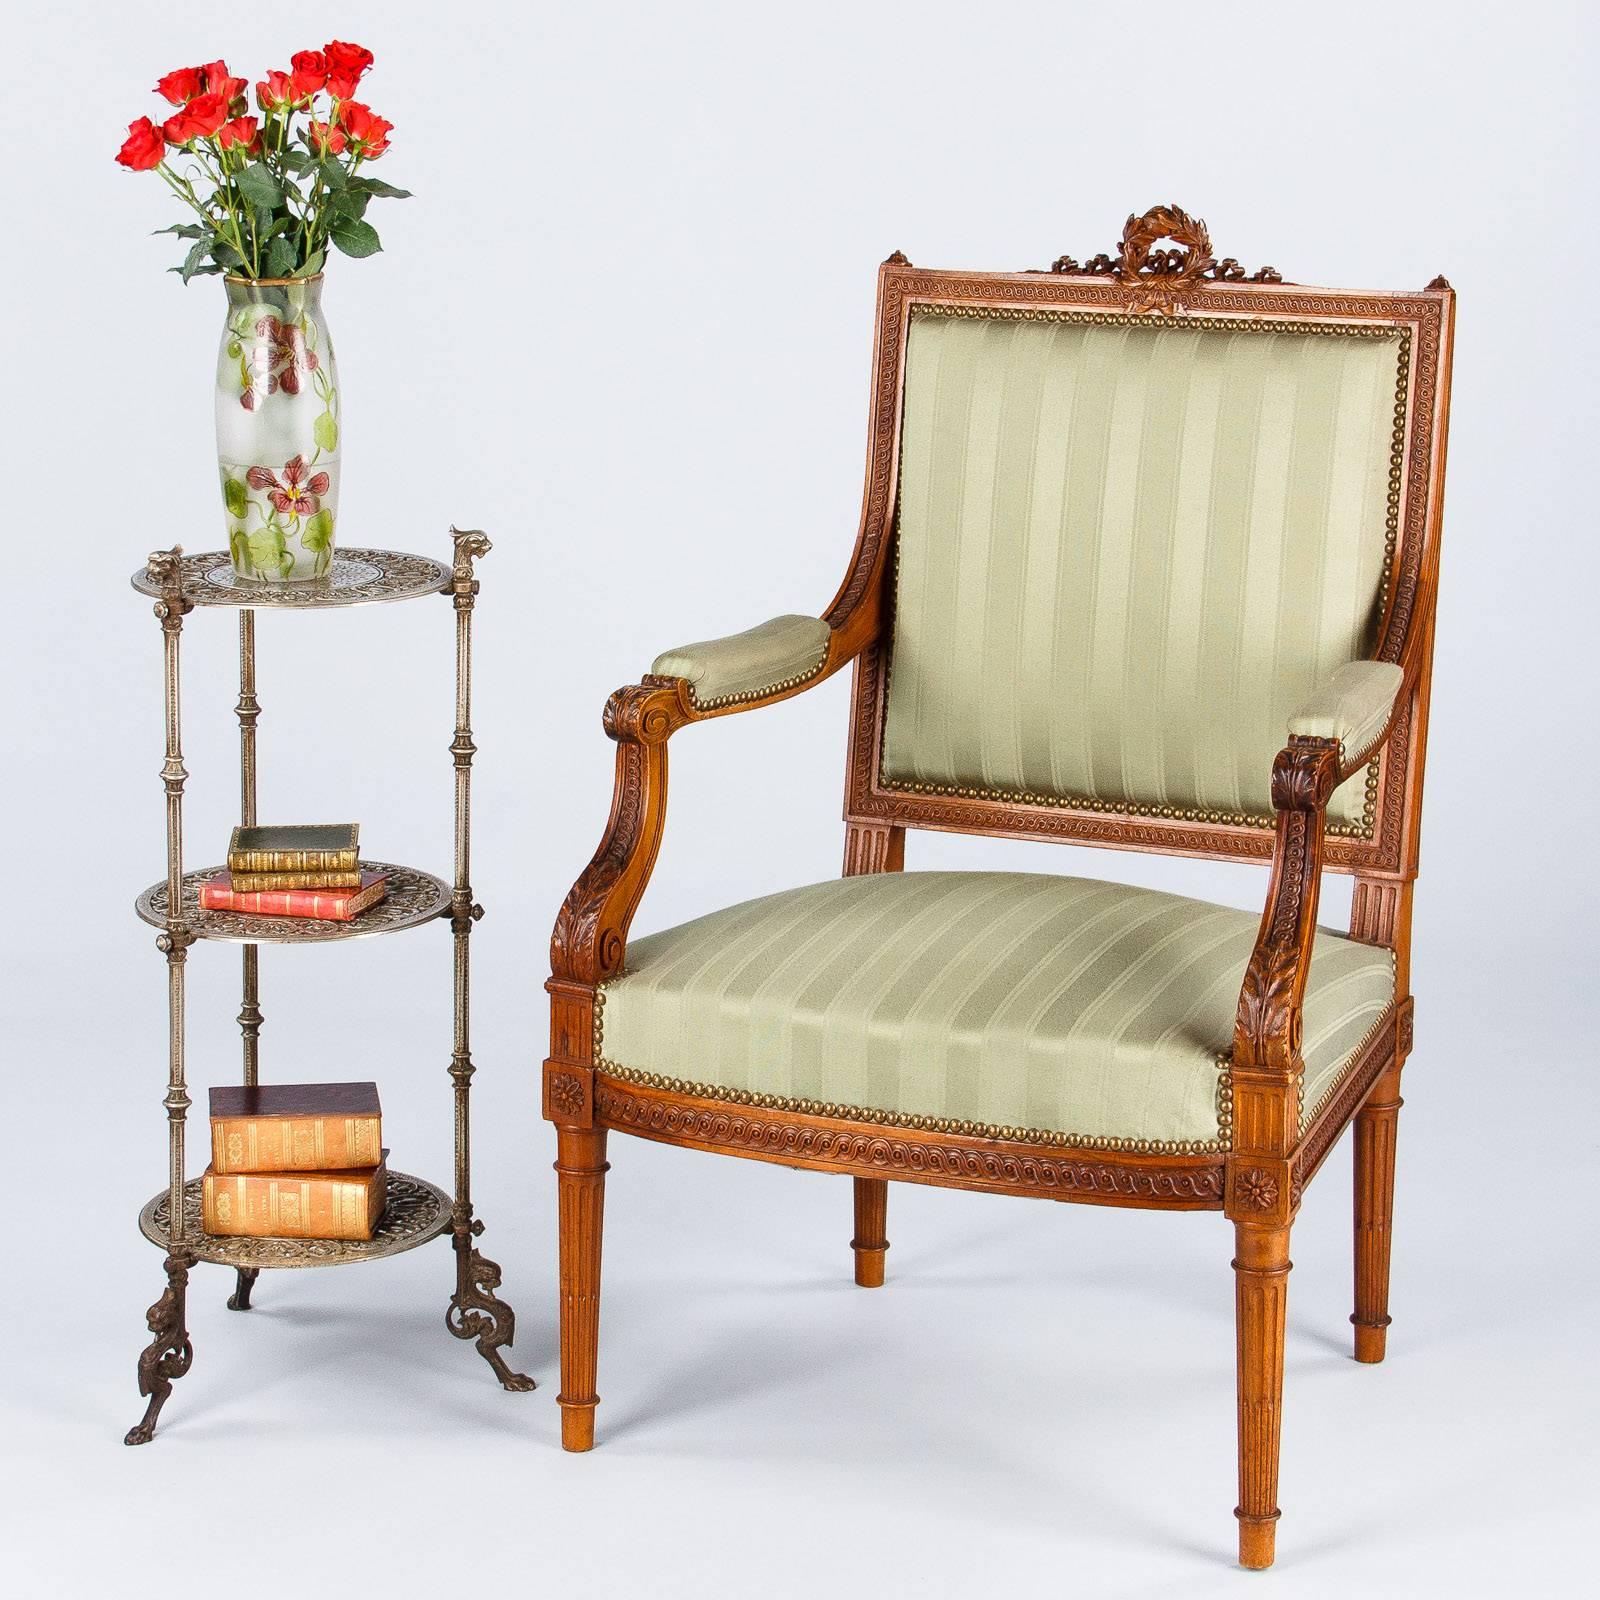 A superb Louis XVI style armchair purchased in Lyon. The armchair is upholstered in green fabric and the frame is walnut wood with beautiful carvings. The top rail features a wreath and water leaves. Acanthus leaves and gadrooning around the